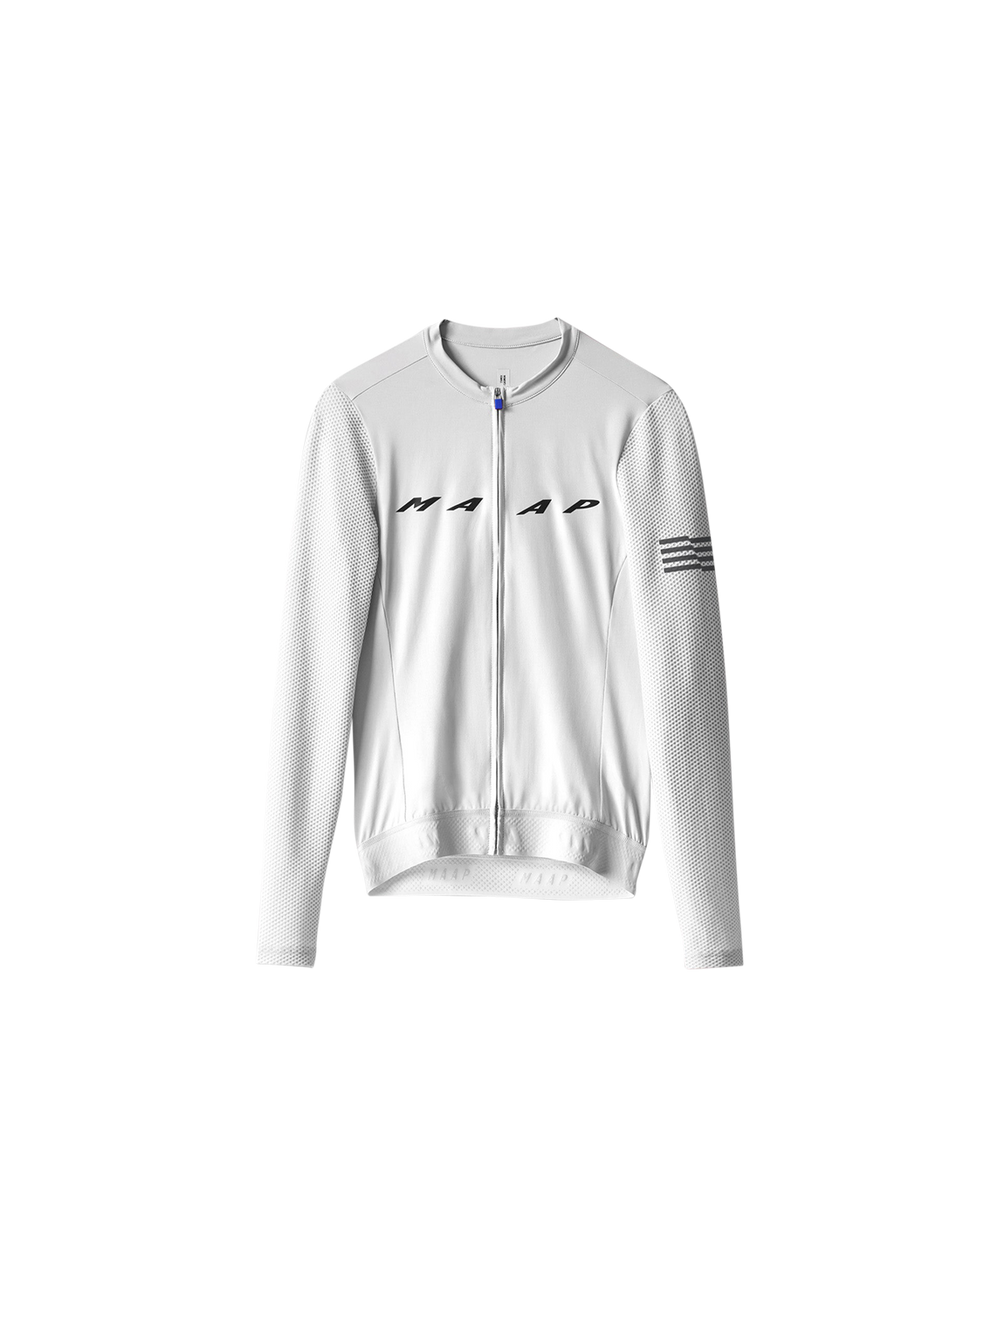 Product Image for Evade Pro Base LS Jersey